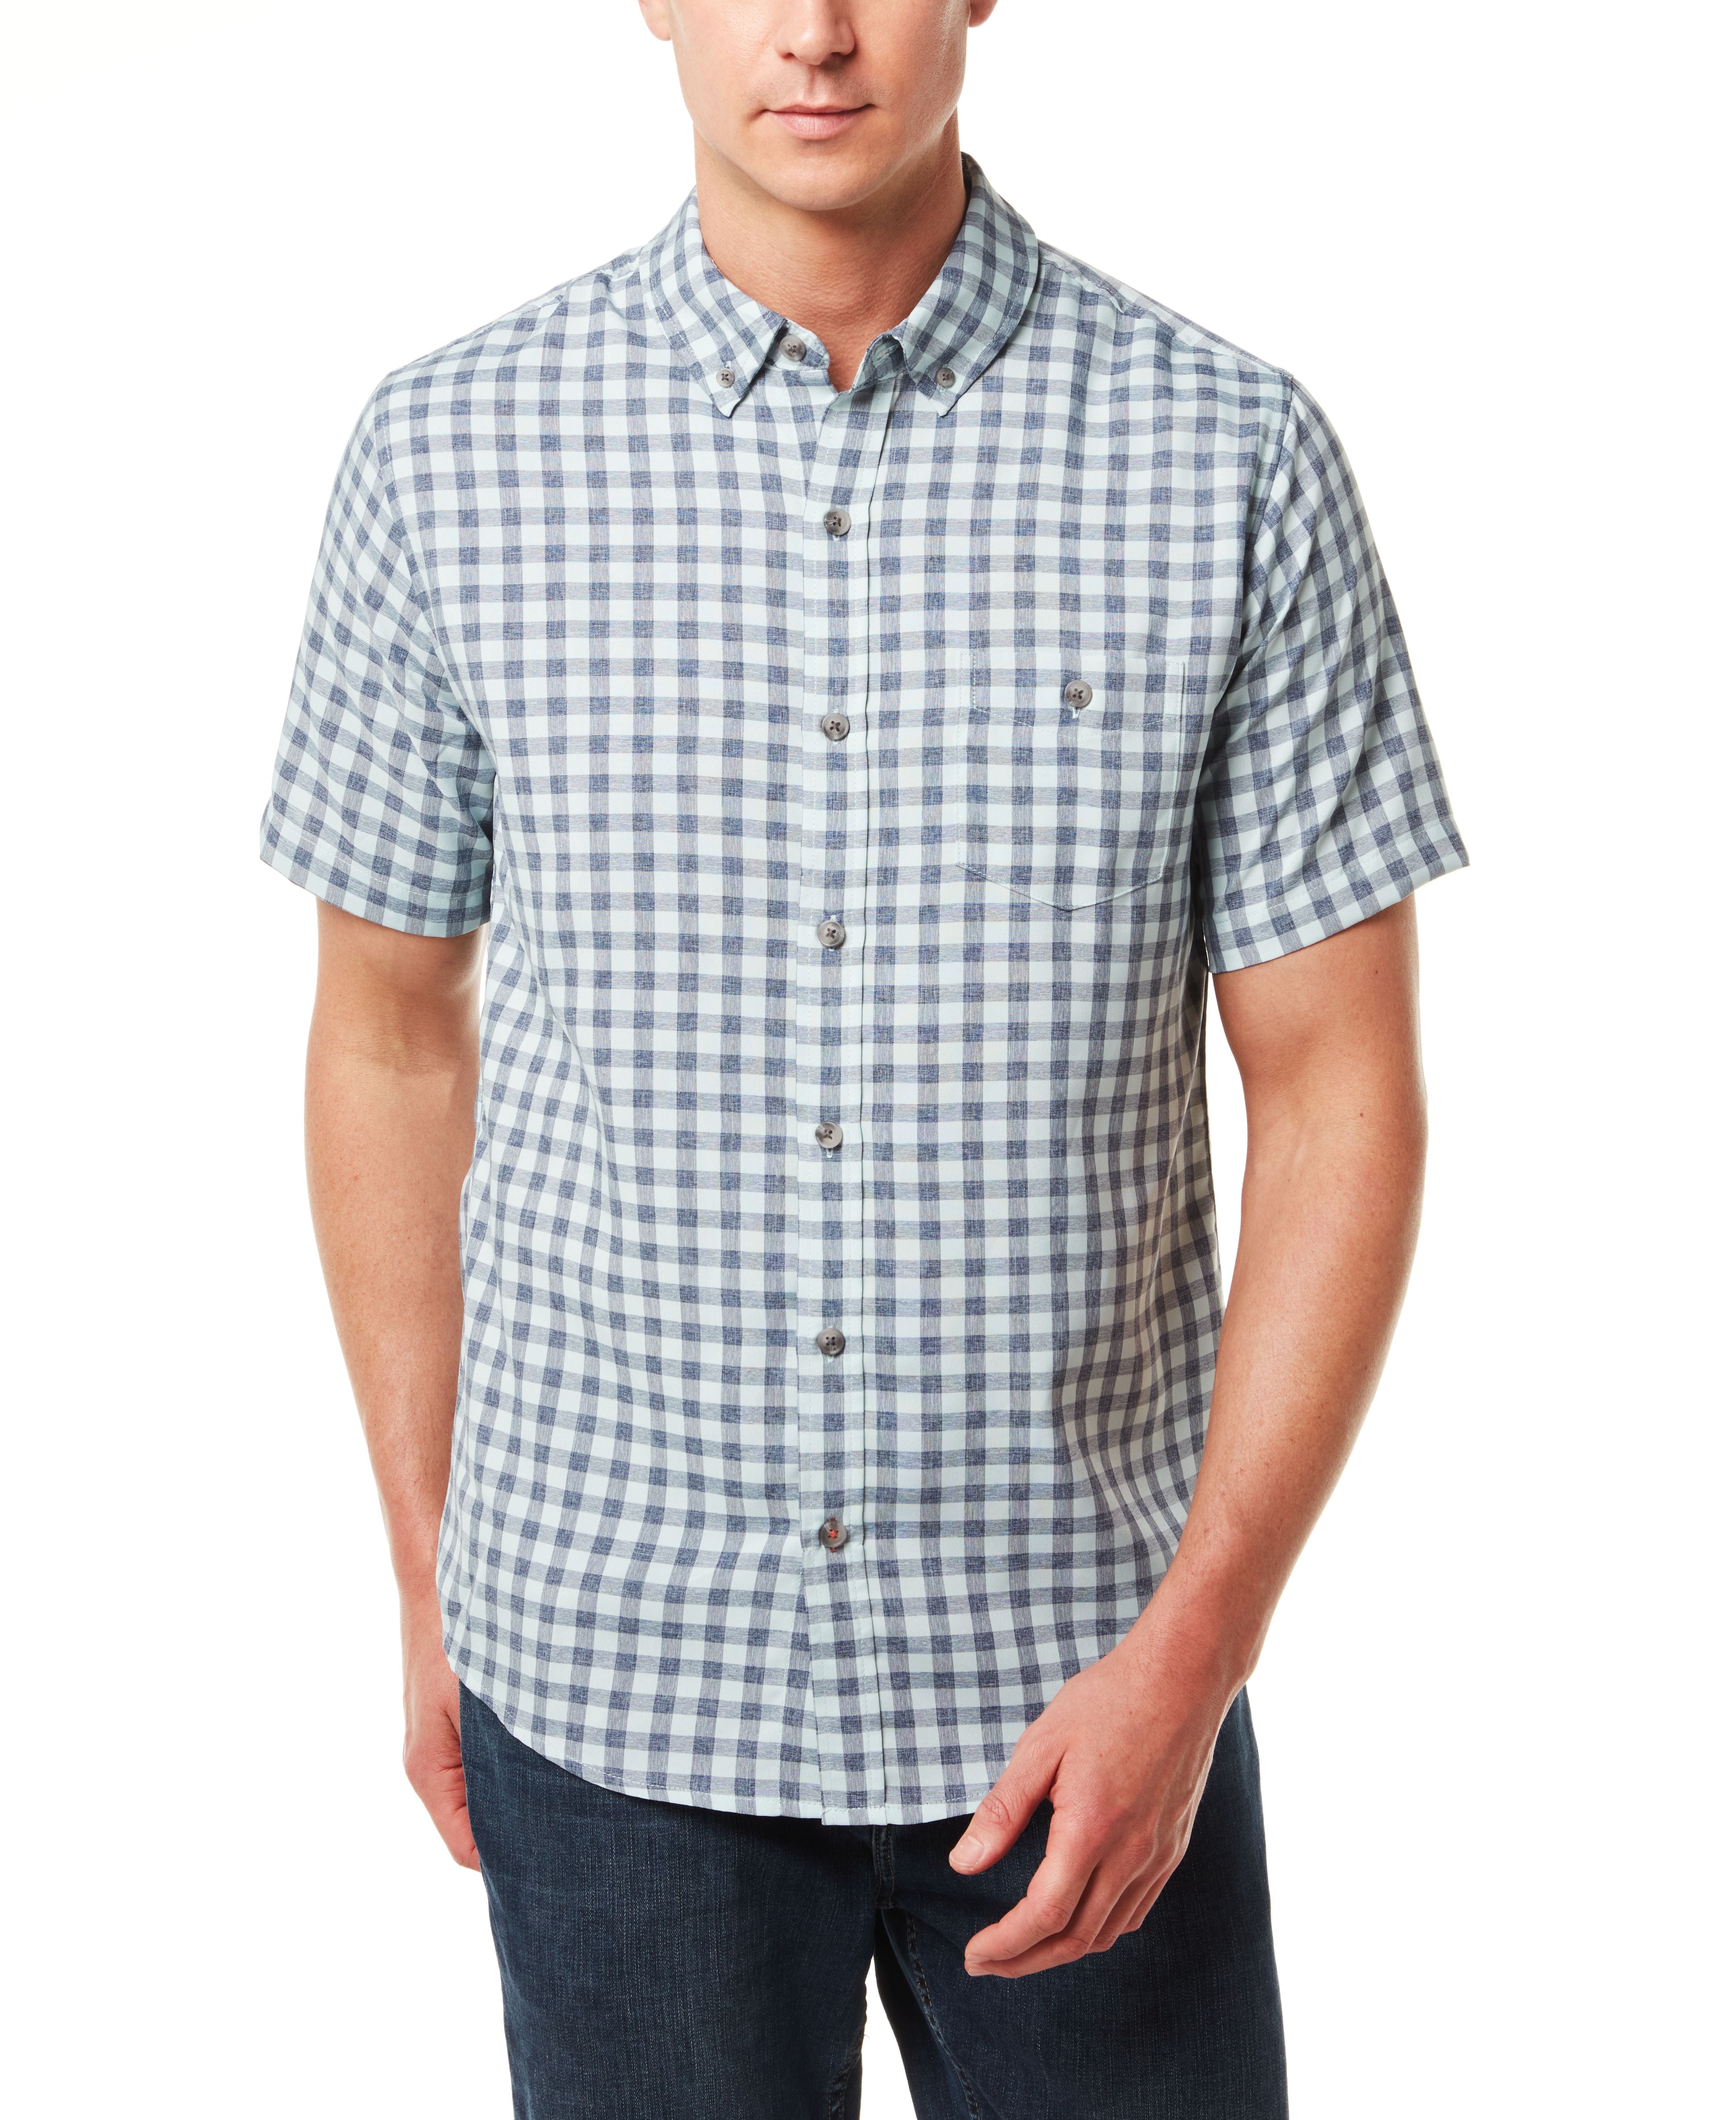 Plaid Performance Shirt in Sterling Blue Check